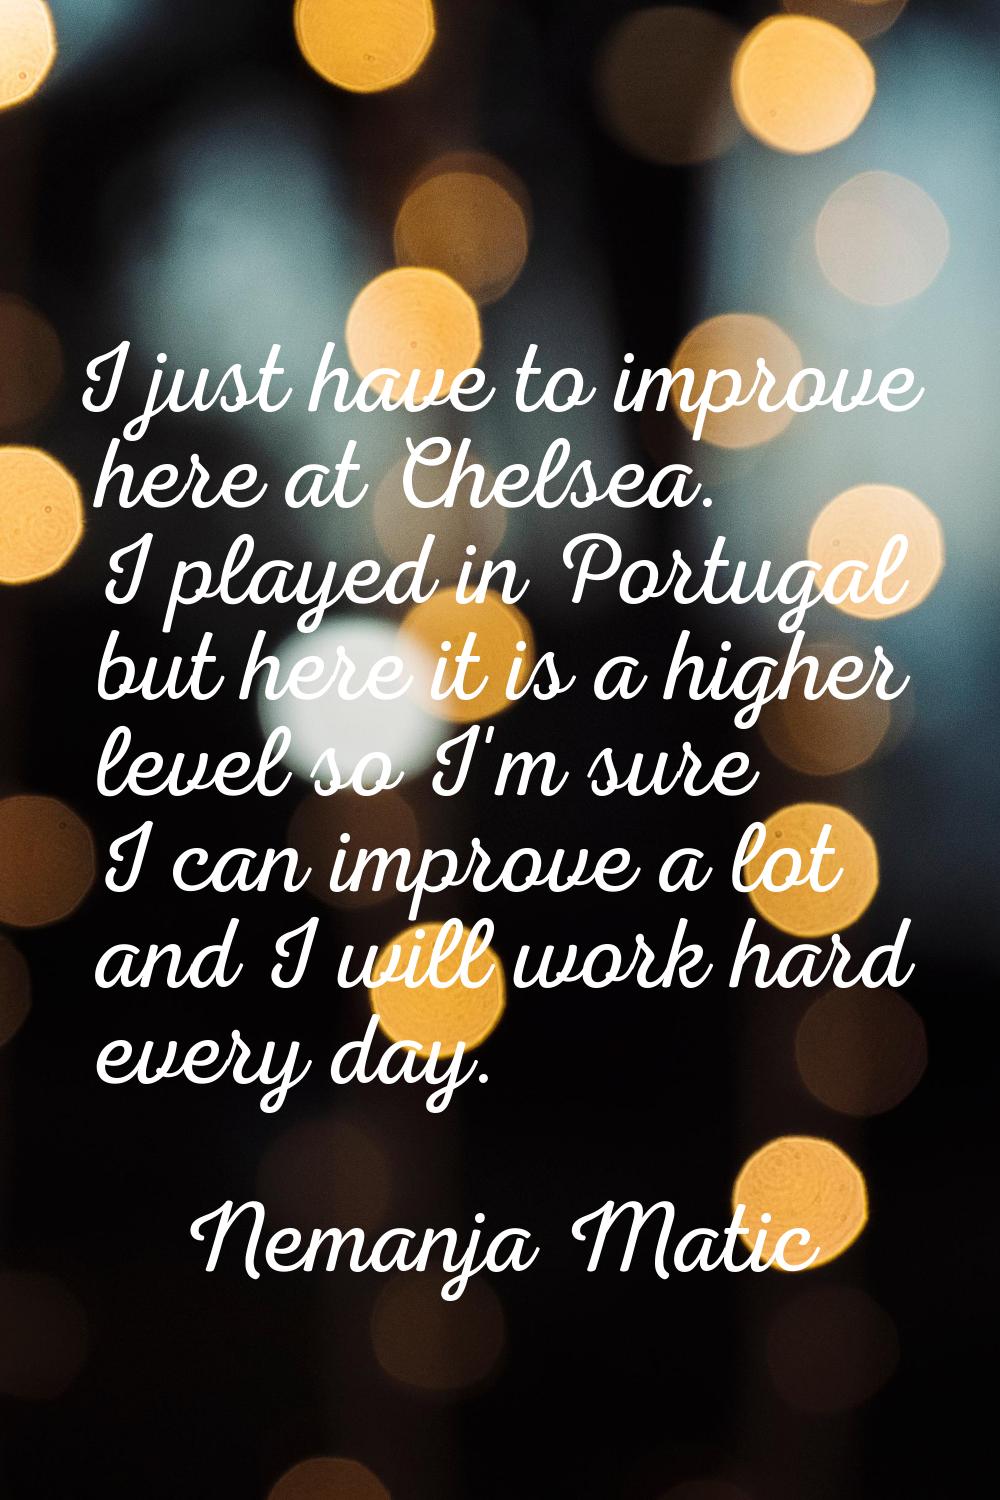 I just have to improve here at Chelsea. I played in Portugal but here it is a higher level so I'm s